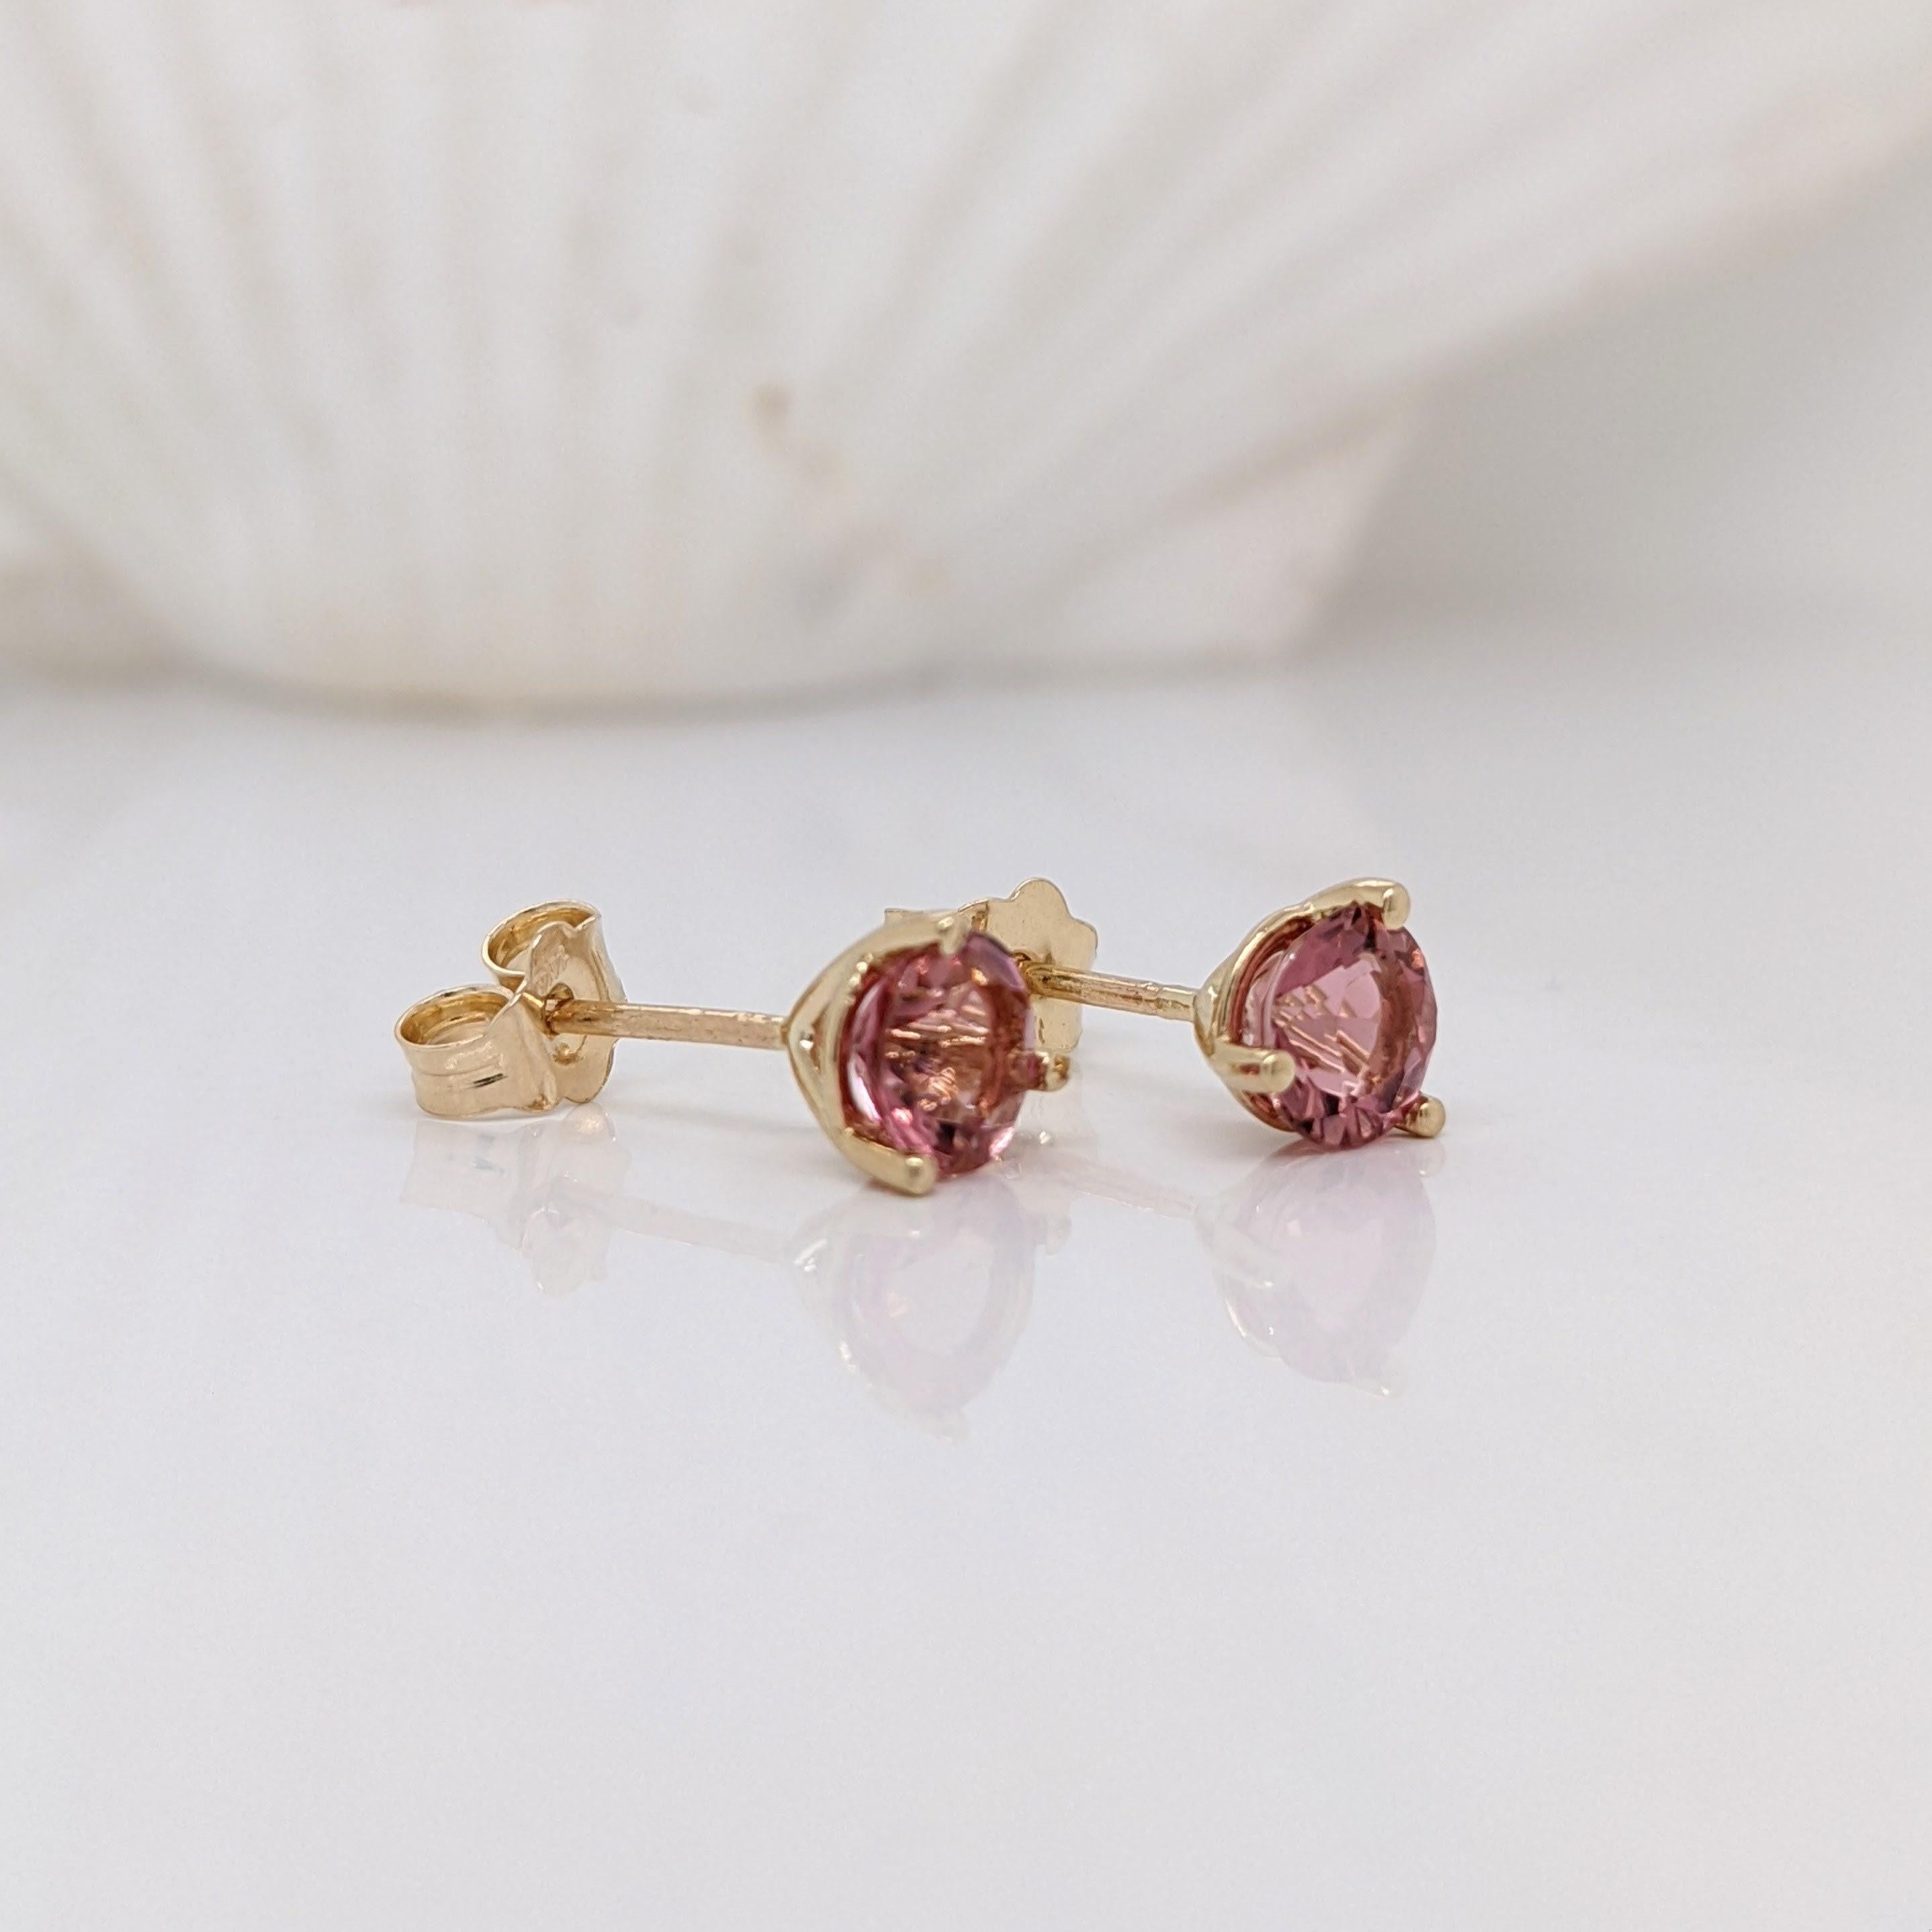 Natural Pink Tourmaline stud earrings with a martini prong setting in 14k solid gold. Bright, round Pink Tourmaline sparkles gorgeously in these stud earrings.  A friction backing makes for easy and comfortable wear.

The birthstone of October is